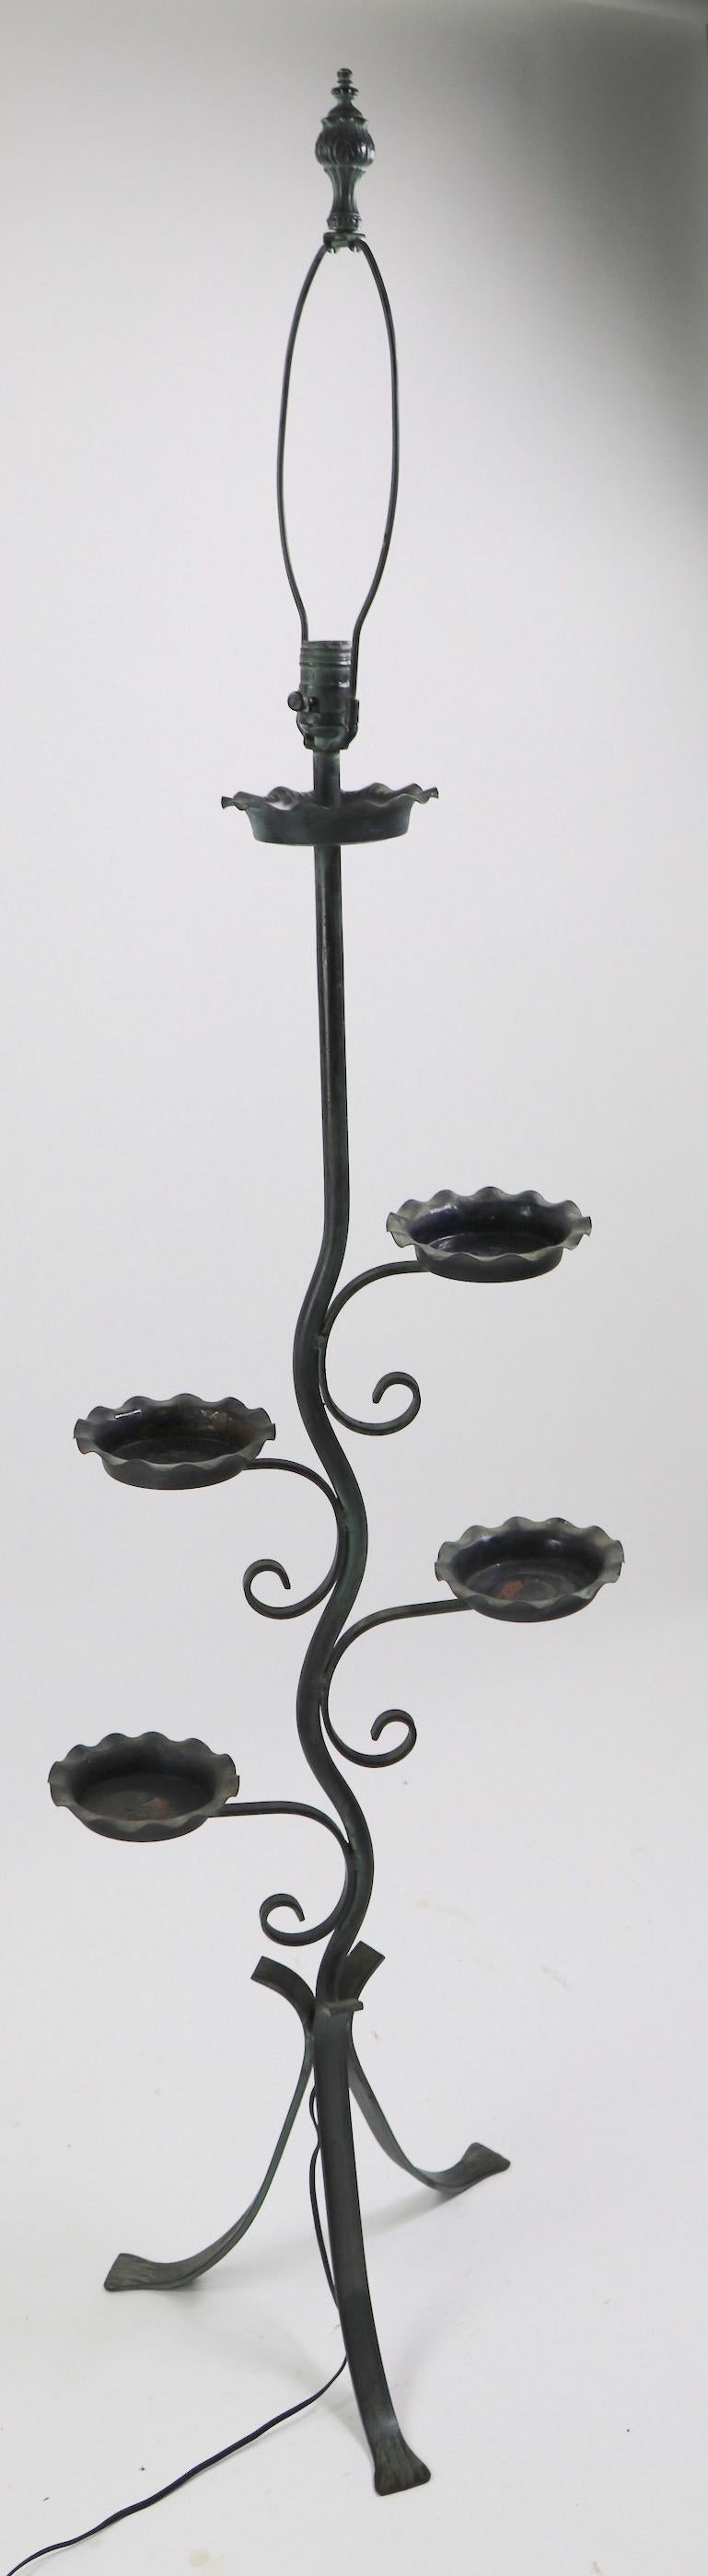 Stylish wrought and cast iron floor lamp, plant stand, in original faux verdigris finish. This interesting floor lamp has four arms, or branches, which support small ( 5.5 inch total diameter) trays, designed to hold a potted plant. The top is a